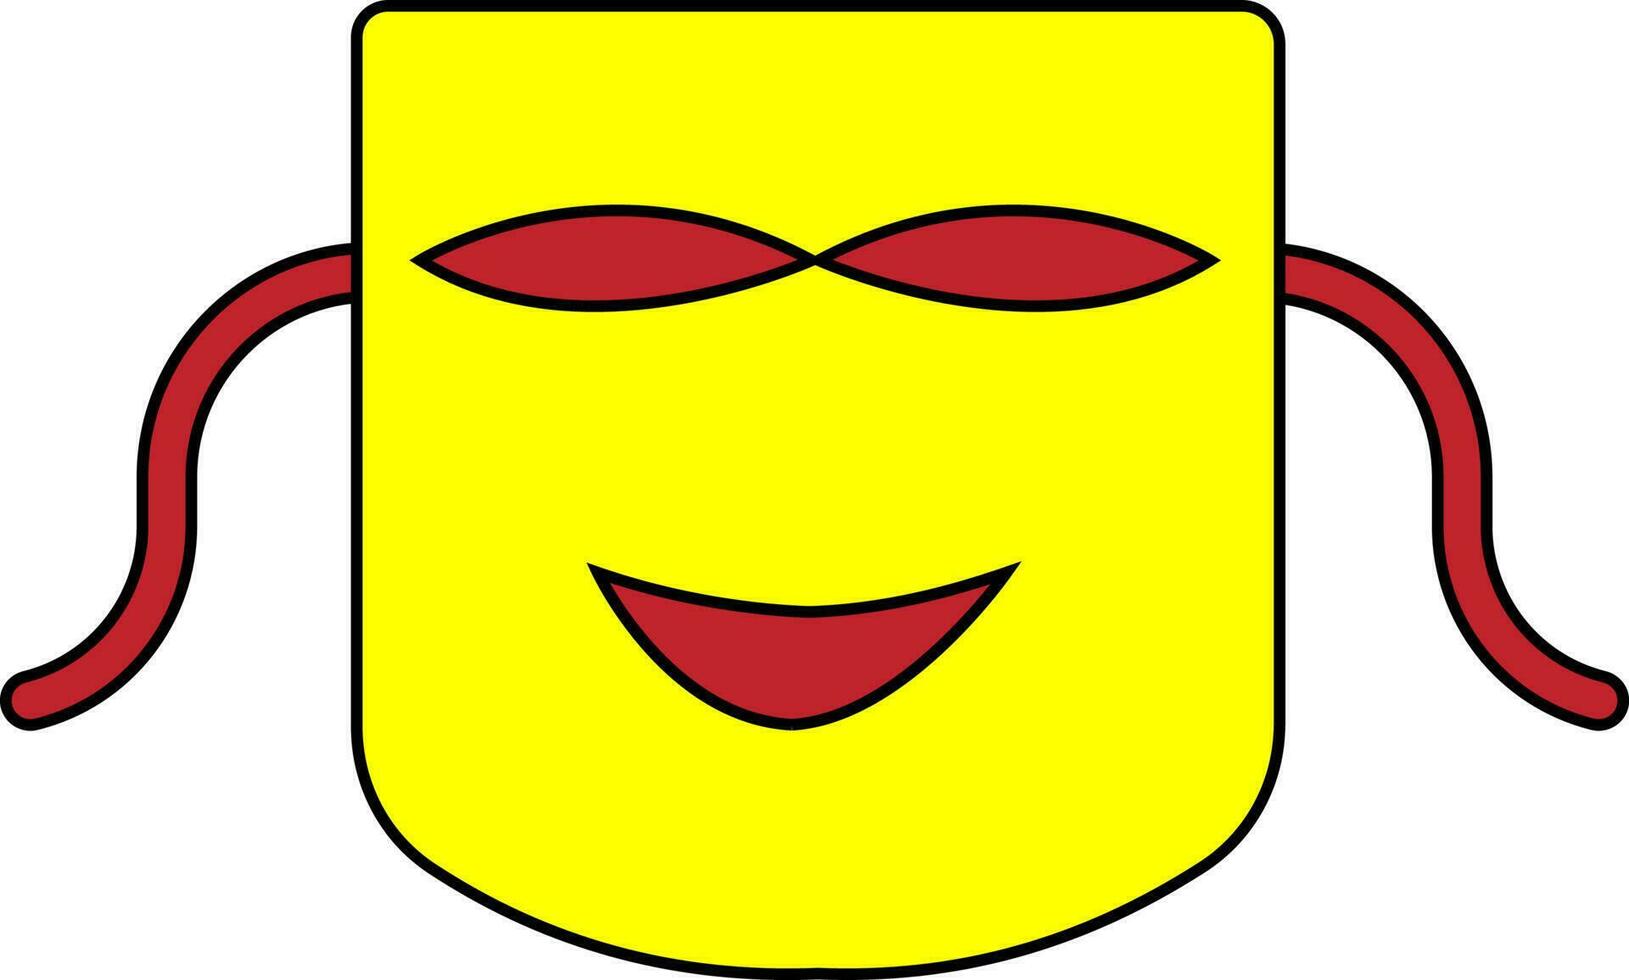 Red and yellow face mask. vector